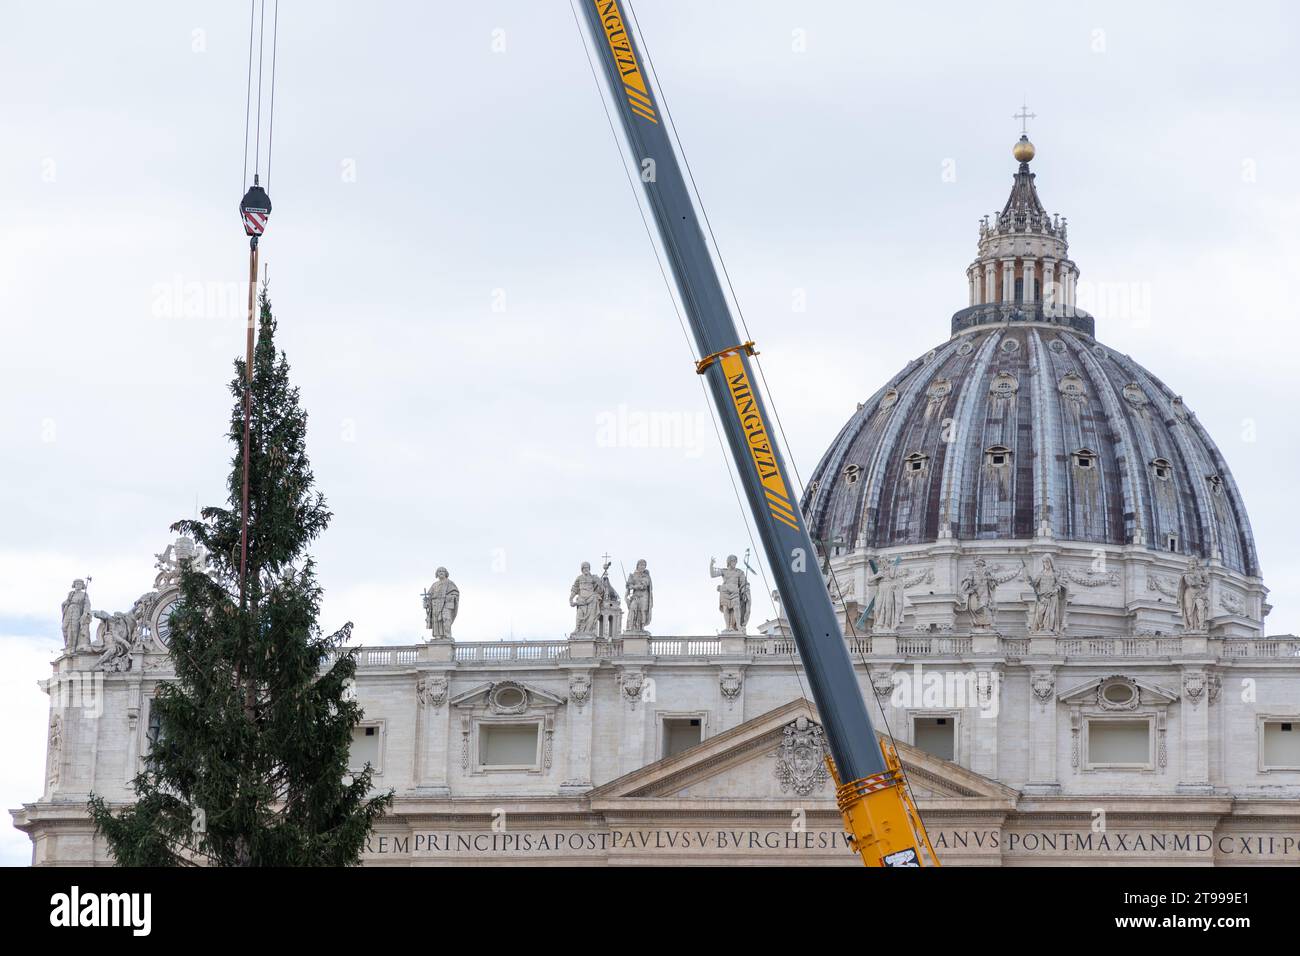 Rome, Italy. 23rd Nov, 2023. Detail of the installation of the Christmas tree in St. Peter's Square. The Christmas tree arrived in St. Peter's Square with 27 meters high, it weighs 6.5 tons and was donated by the municipality of Macra, in the woods of Cuneo. It will be decorated with lights and over 7,000 dried edelweiss which will give the effect of a snowfall. The lights will be turned on next December 9. (Photo by Matteo Nardone/Pacific Press) Credit: Pacific Press Media Production Corp./Alamy Live News Stock Photo